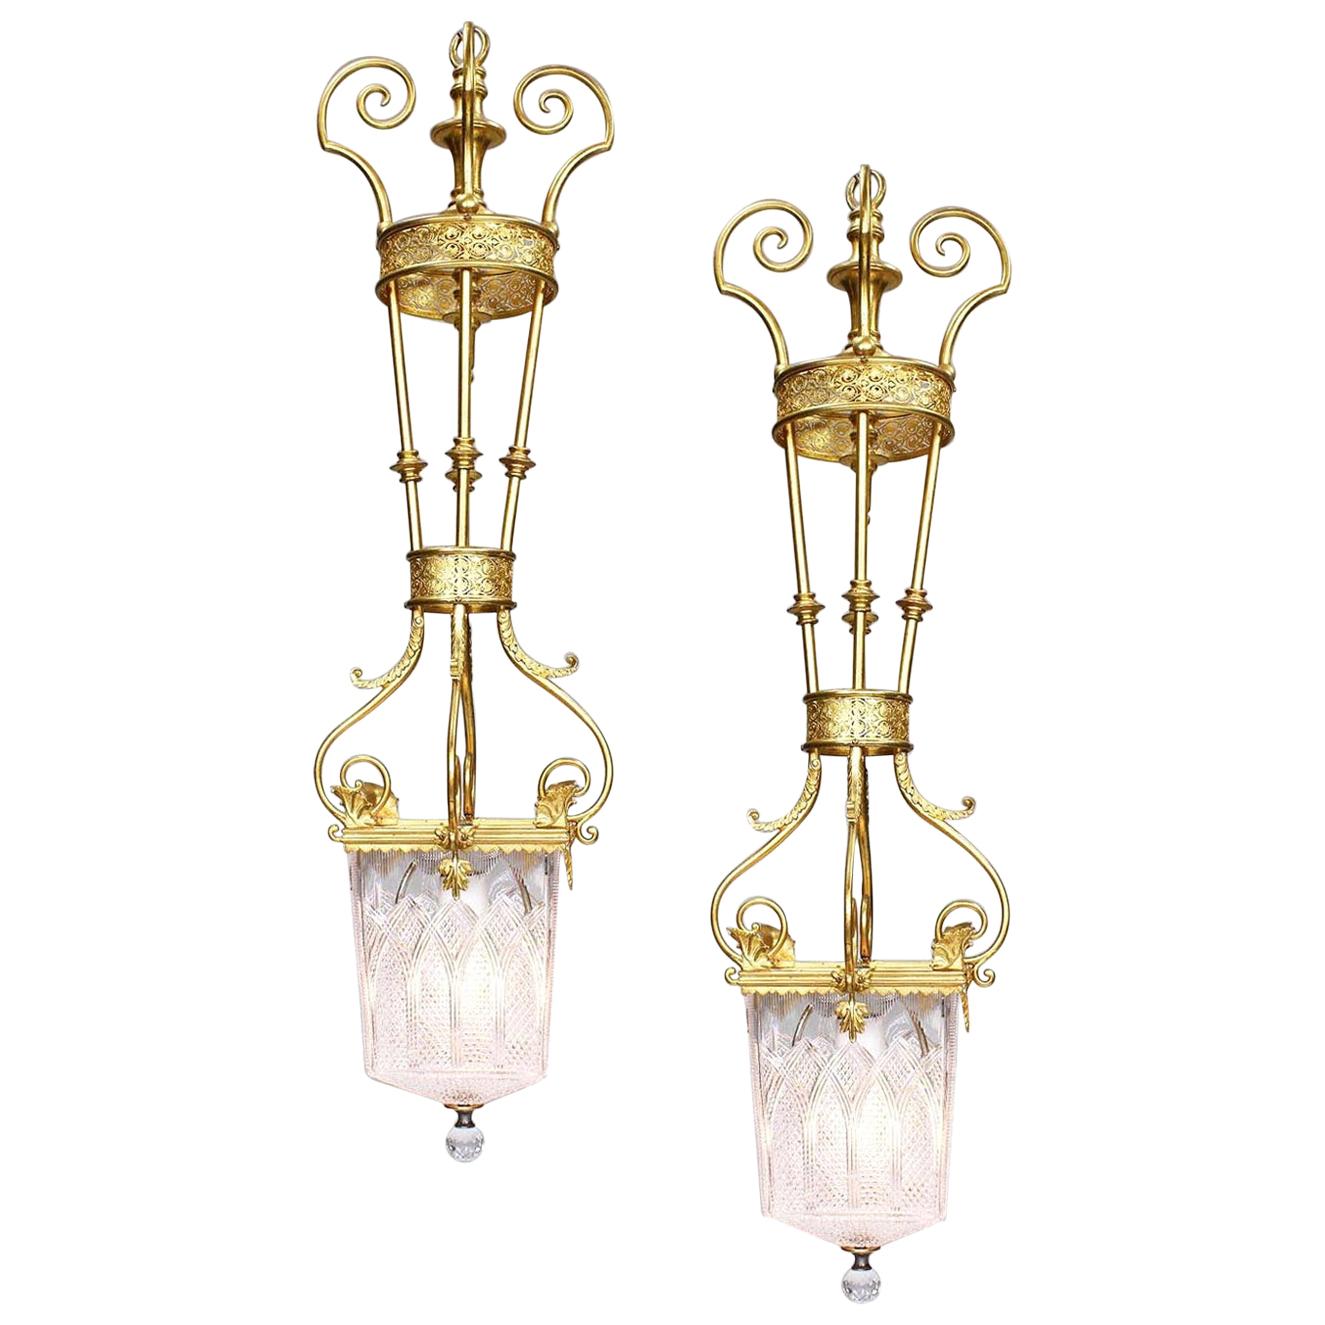 Fine Pair of Belle Époque Neoclassical Style Gilt-Metal and Cut-Glass Lanterns